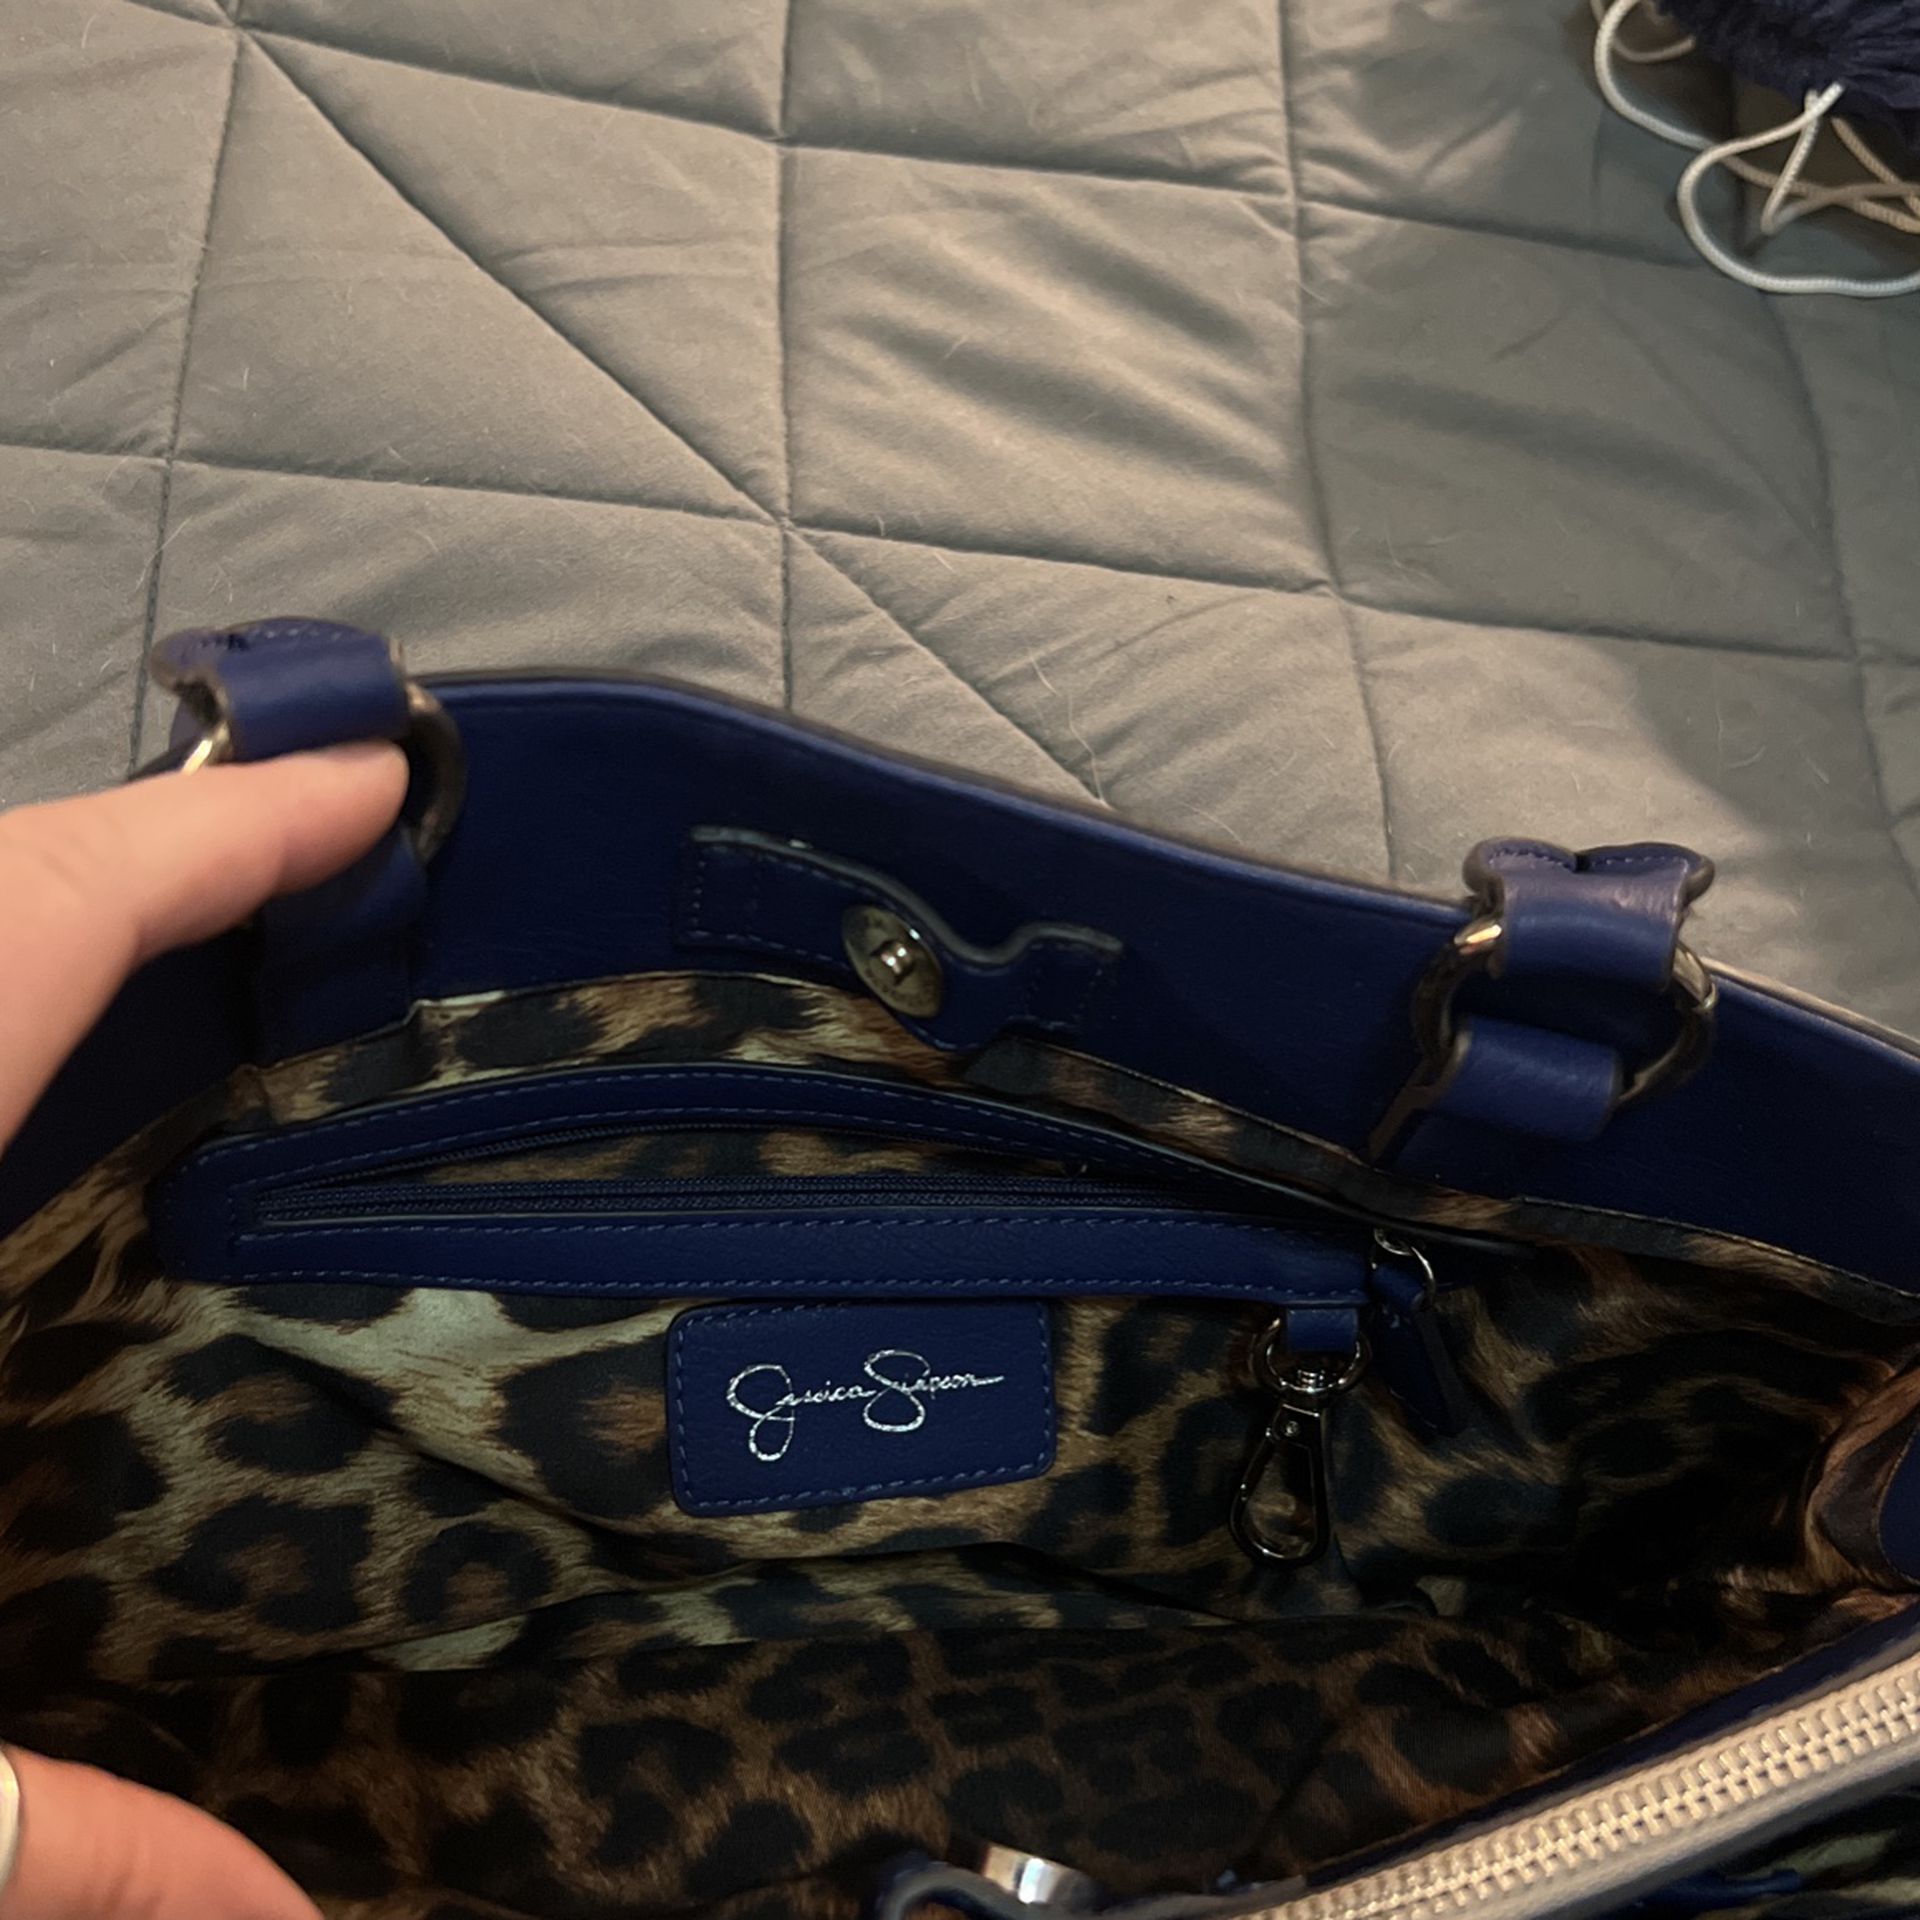 Jessica Simpson Bag Taking Reasonable Offers for Sale in Phoenix